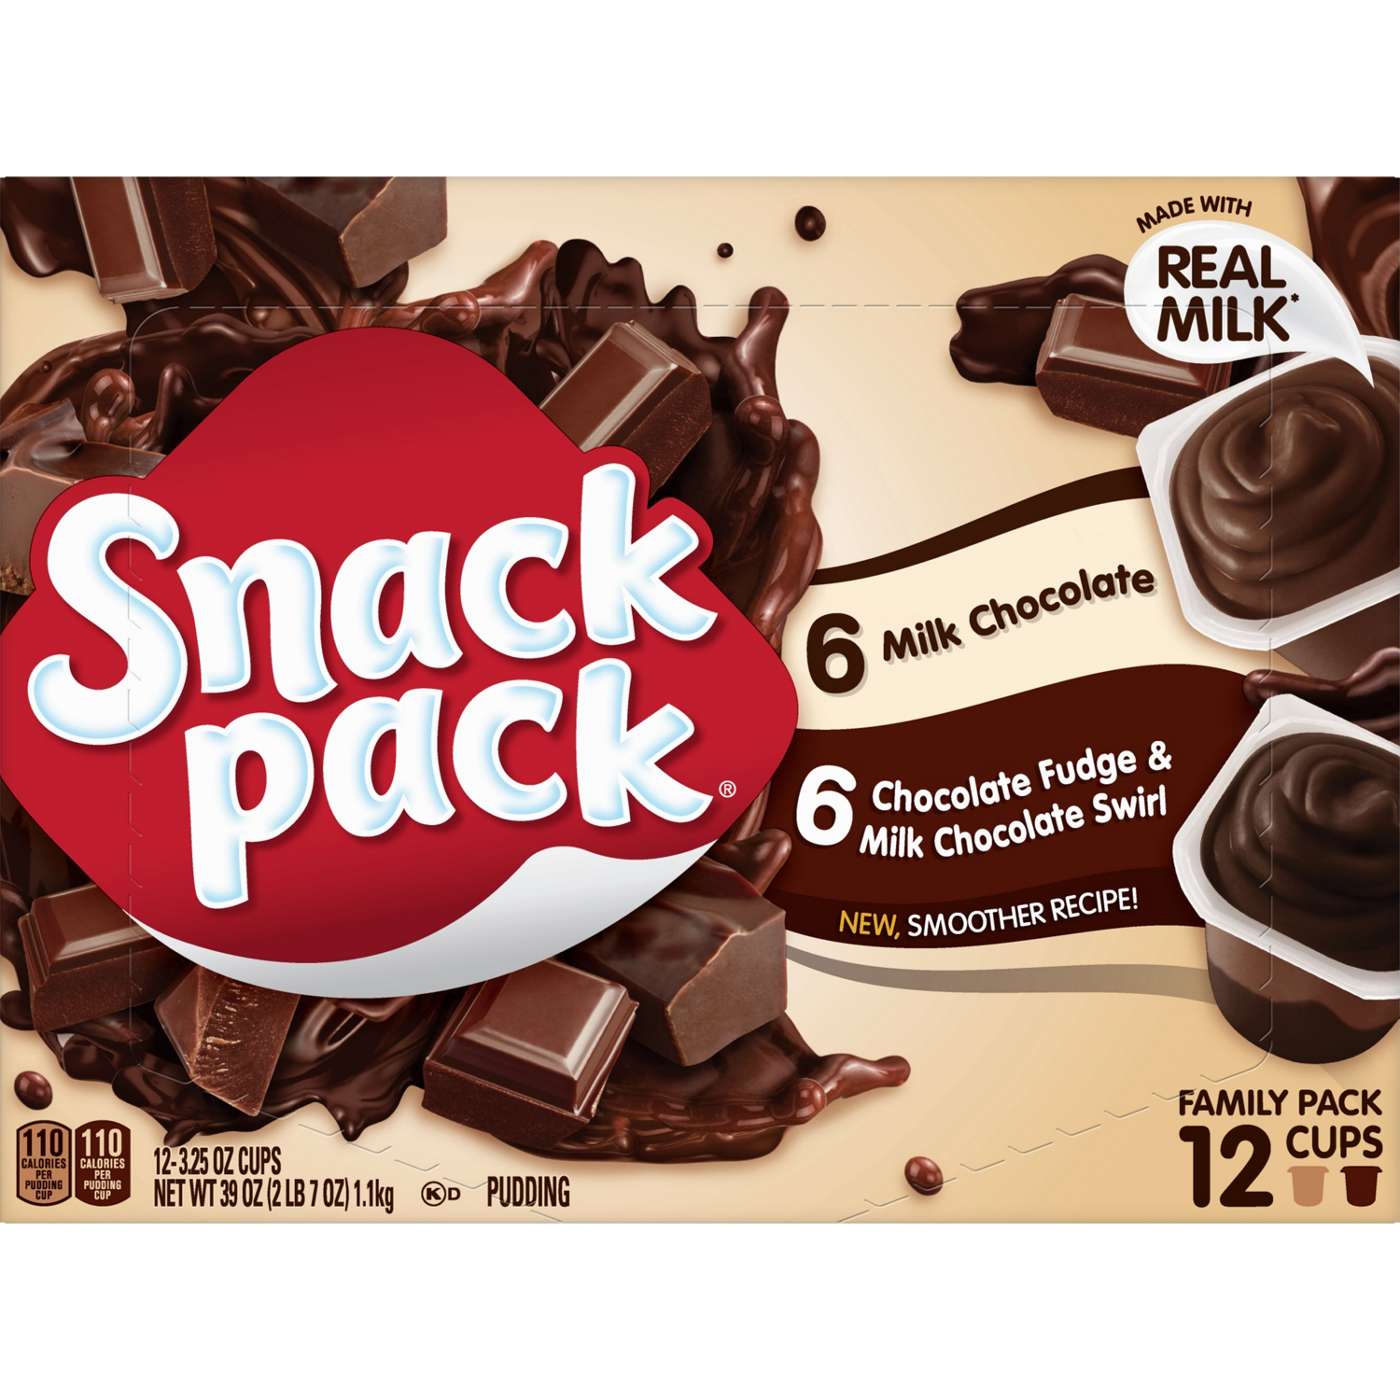 Snack Pack Chocolate Pudding Cups Variety Family Pack; image 6 of 7